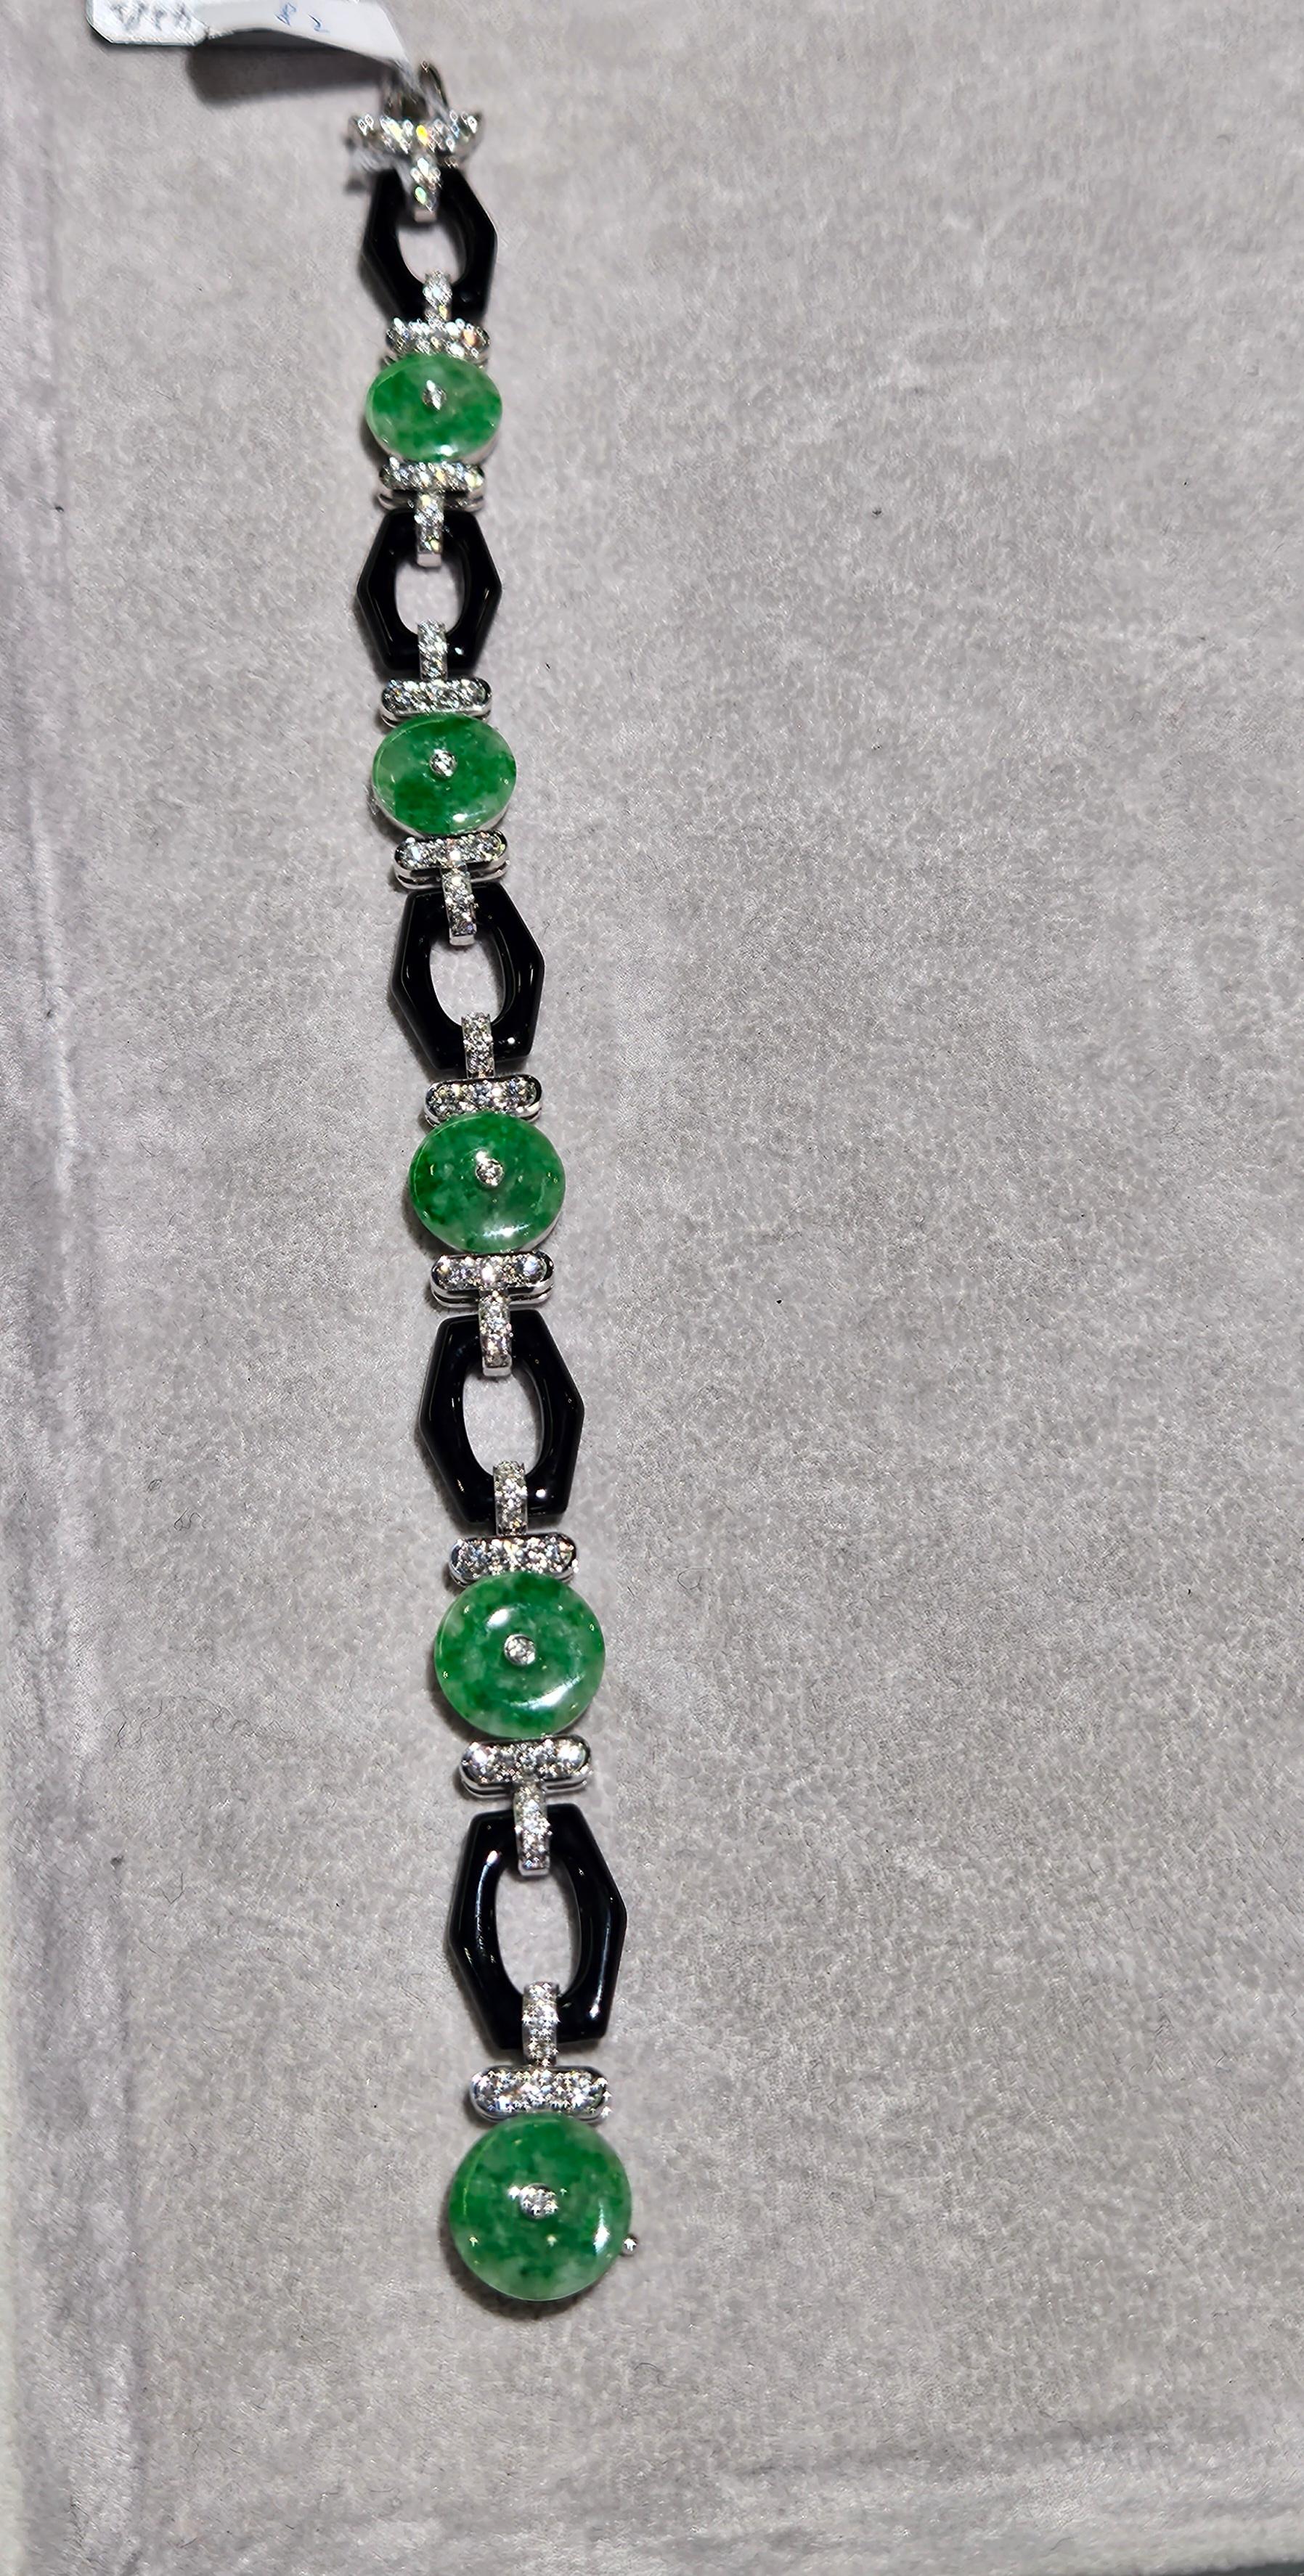 The Following Item we are offering is a Rare Magnificent Radiant 18KT Gold Large Rare Gorgeous Fancy Burmese Jade Diamond Bracelet. Bracelet is comprised of Beautiful Rare Burmese Jade and Glittering Diamonds and Black Onyx. T.C.W. Approx 2CTS of